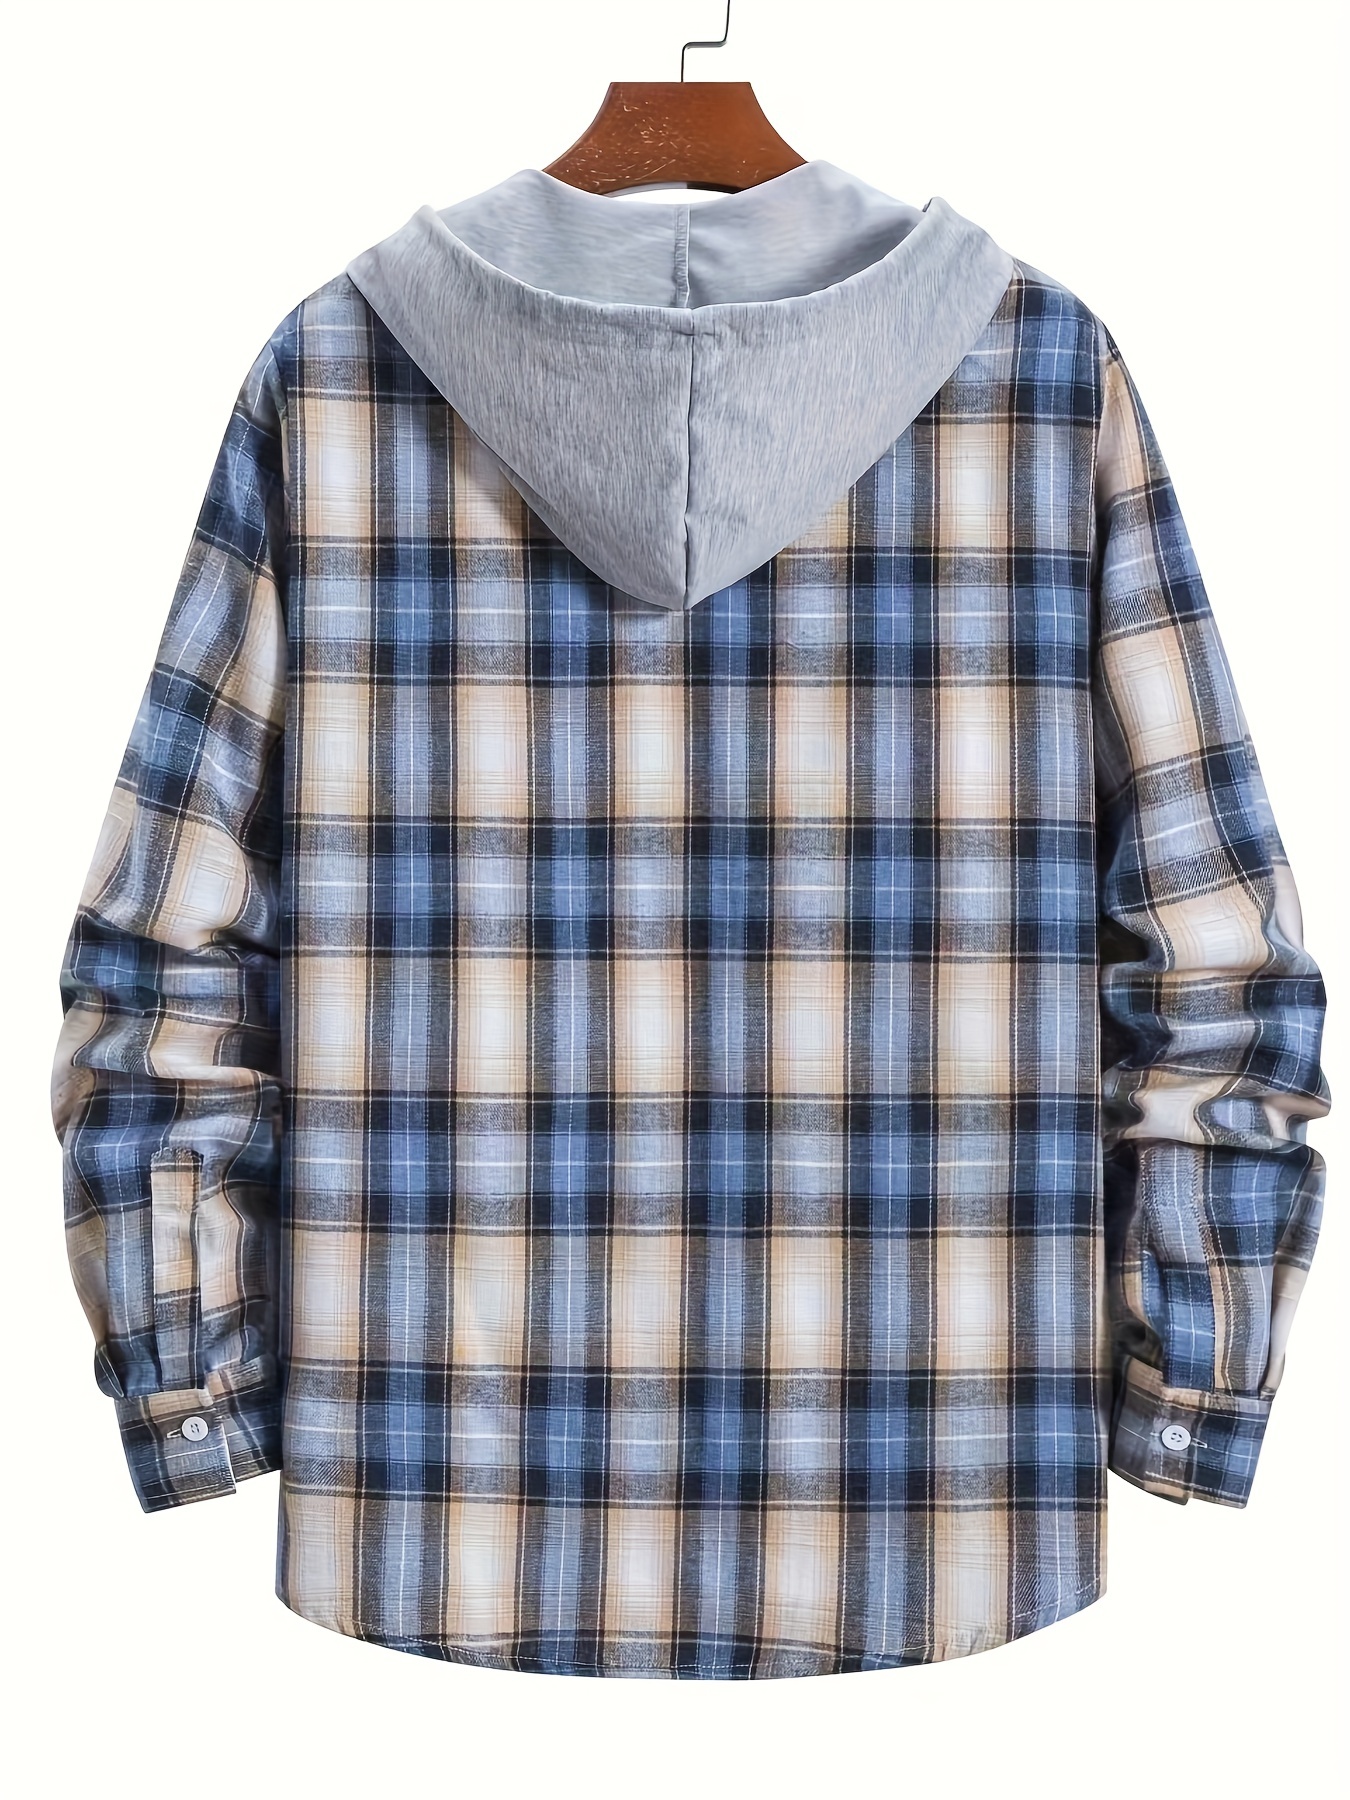 Cotton Blend Plaid Shirt Coat For Men Long Sleeve Casual Regular Fit Button  Up Hooded Shirts Jacket